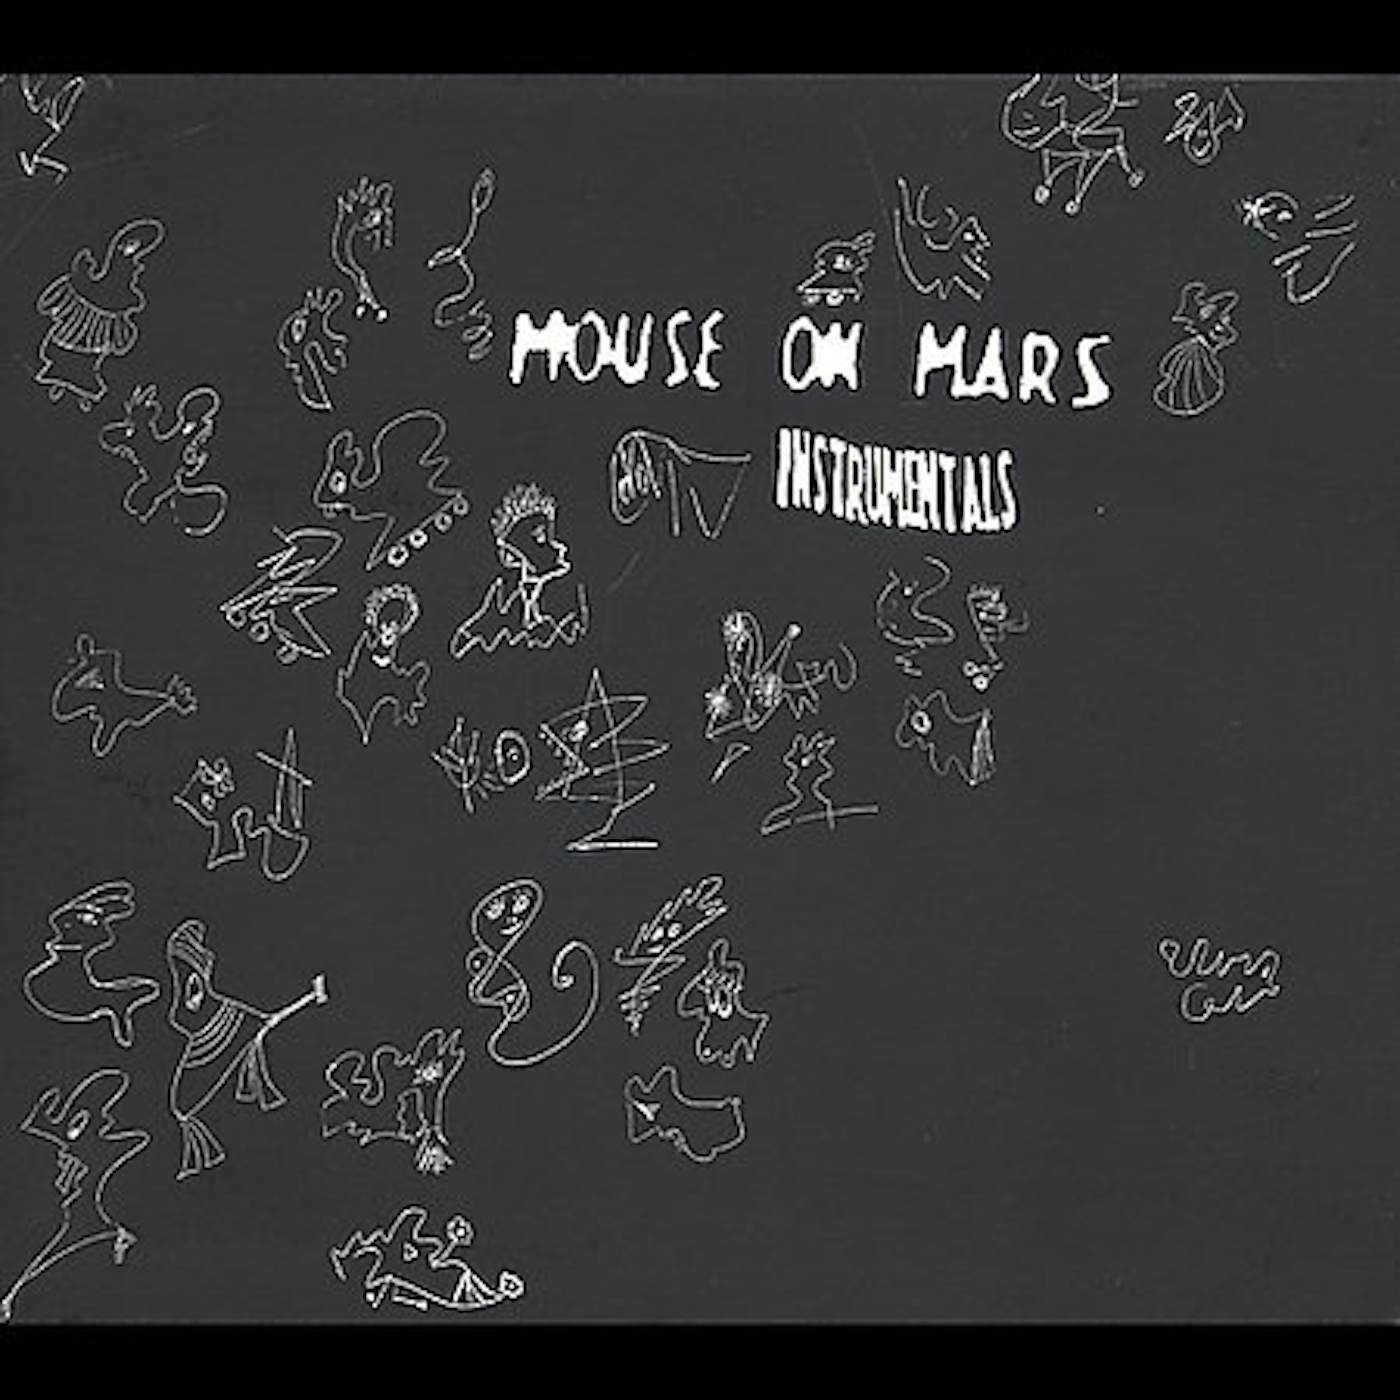 Mouse On Mars INSTRUMENTALS CD